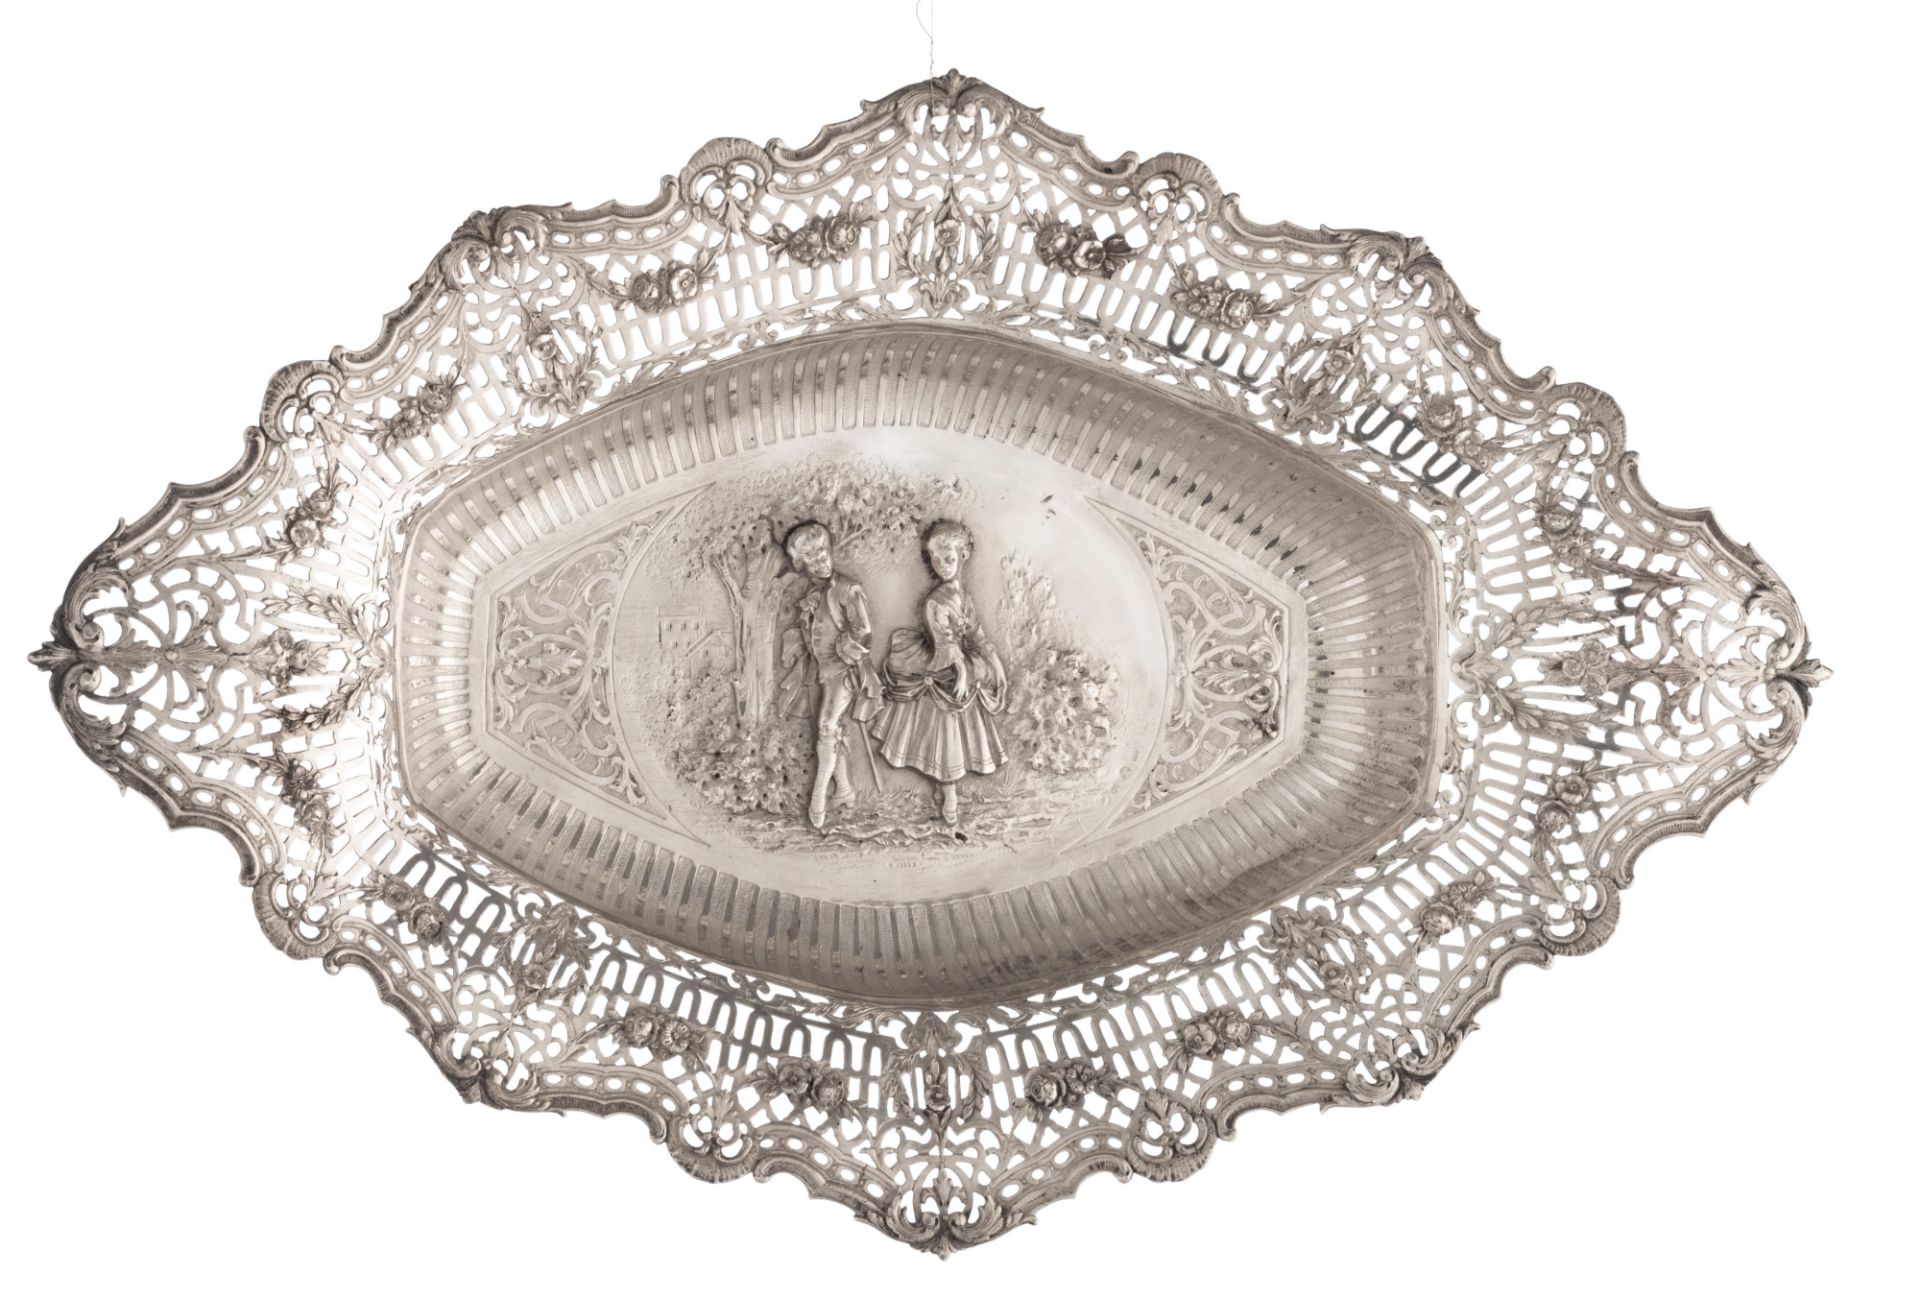 A collection of three silver chargers with ornate repousse pierced work, the well depicting playing - Bild 2 aus 12